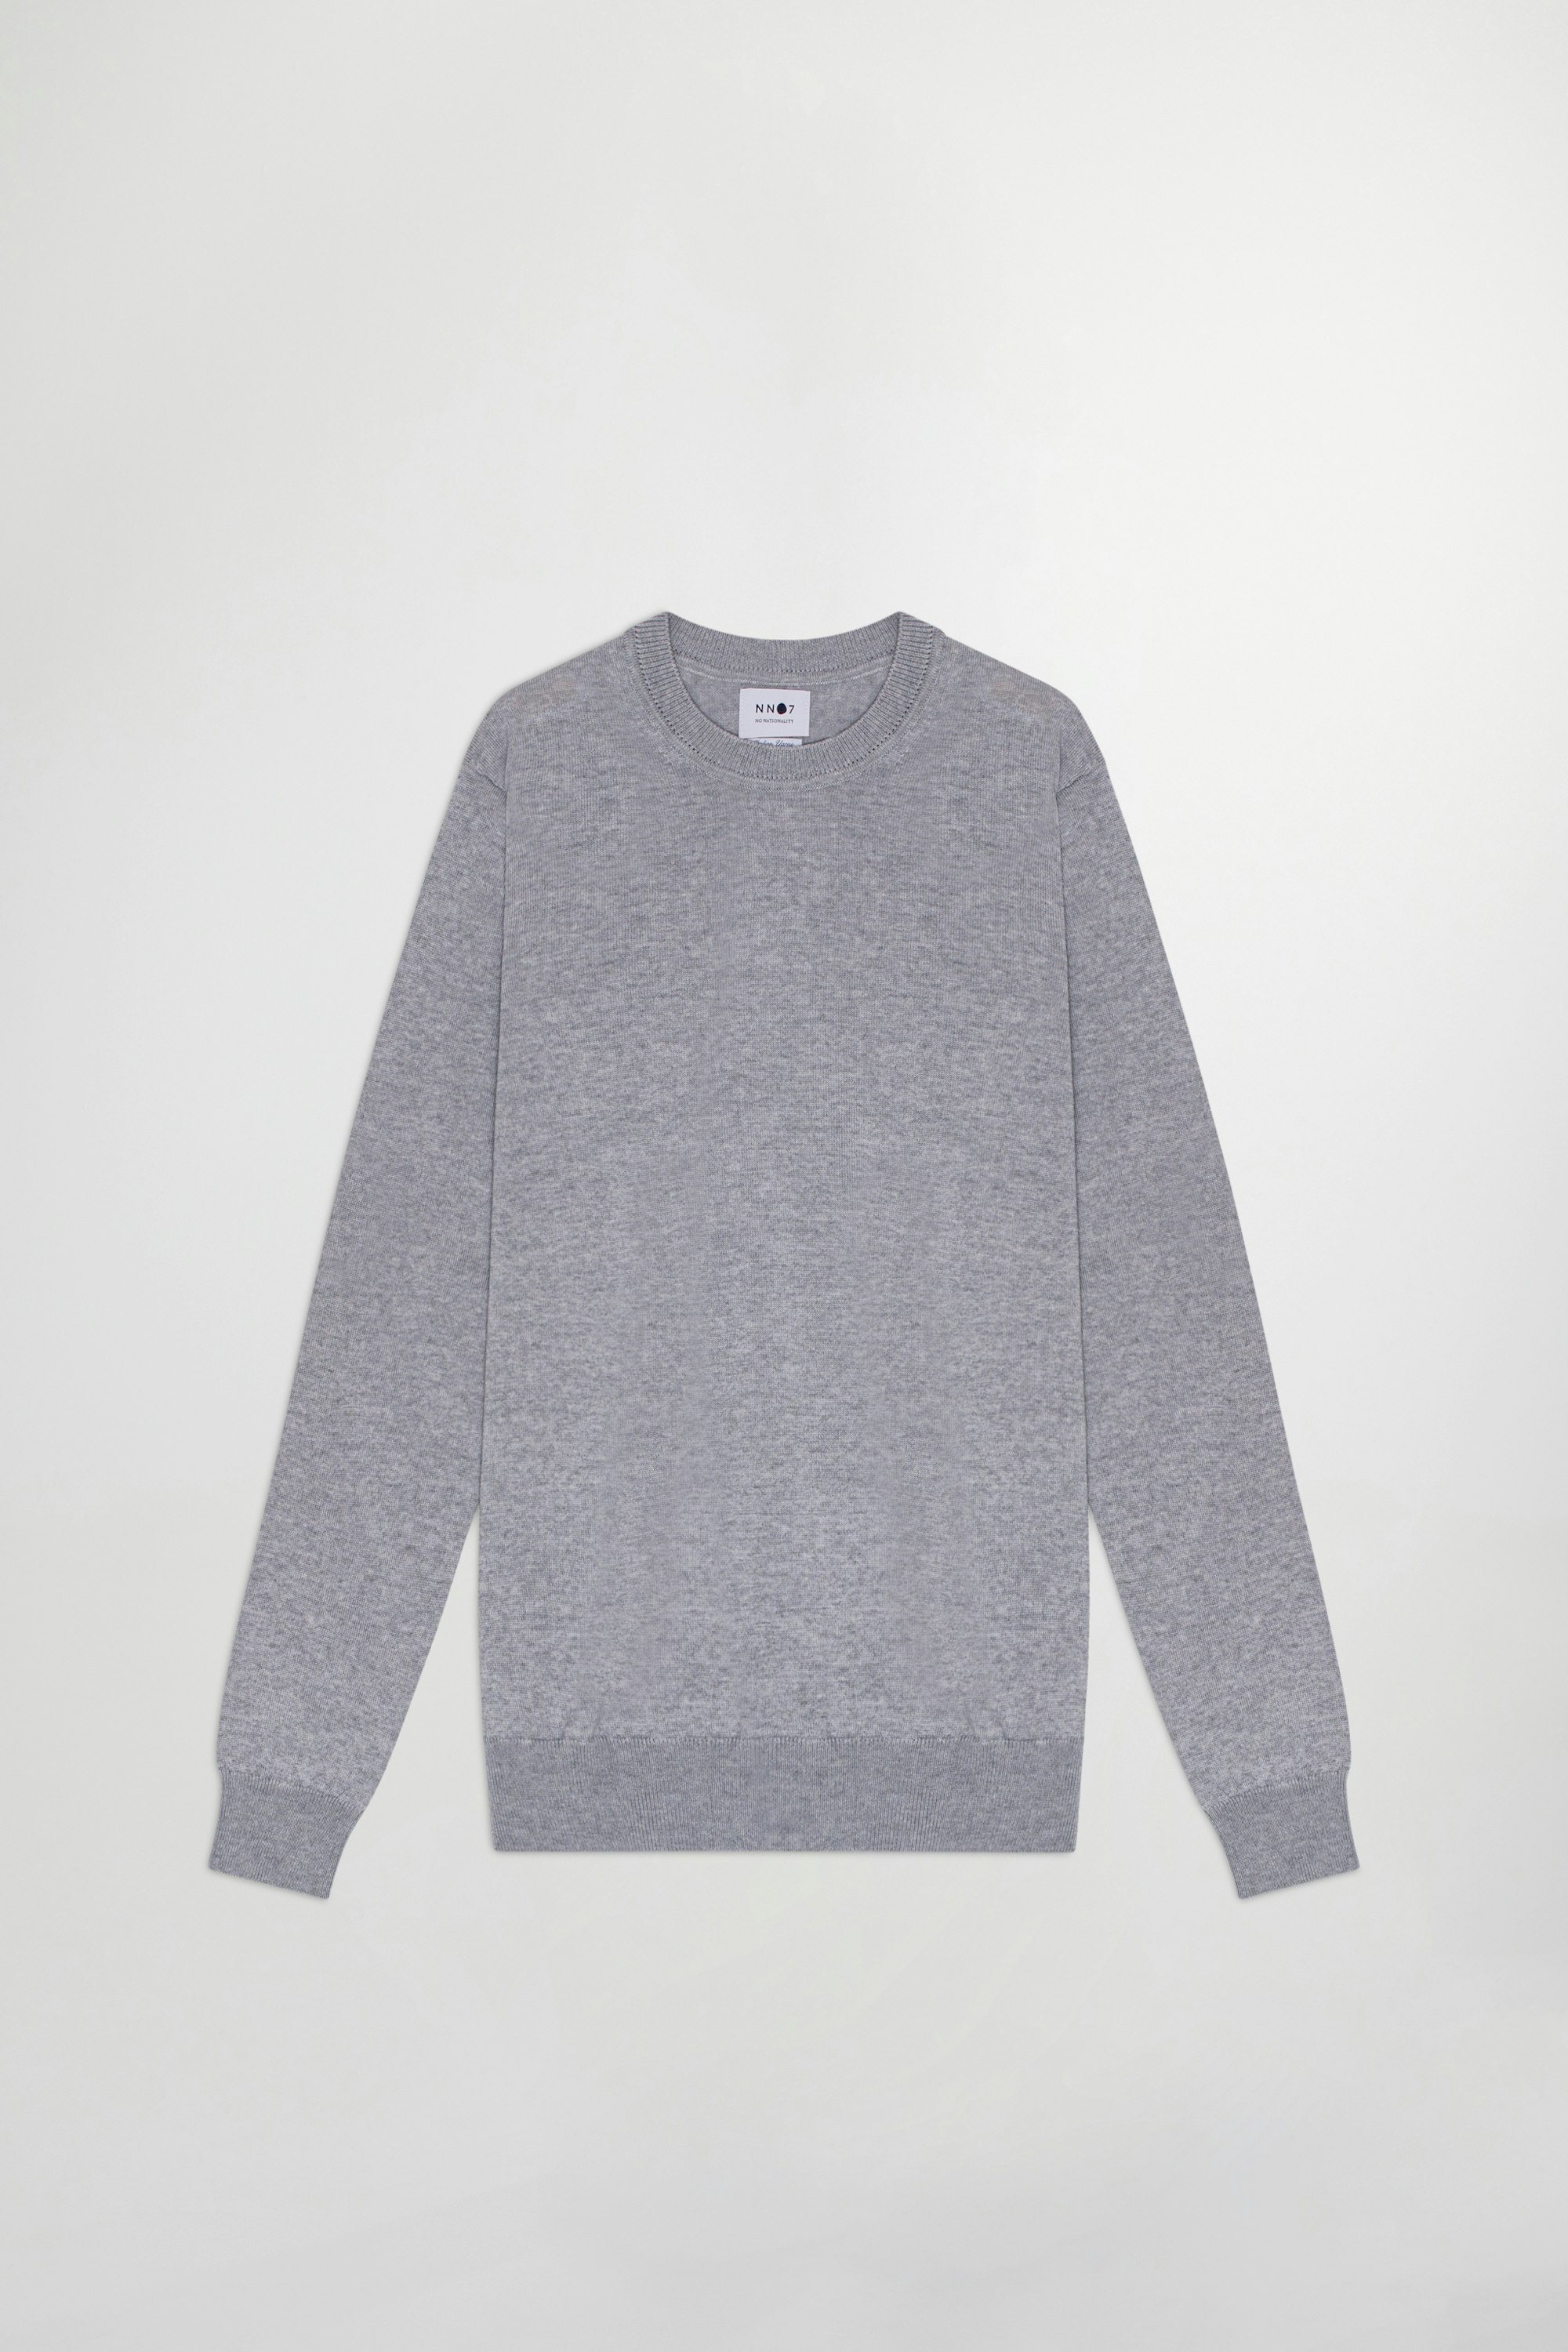 Ted 6328 men's sweater - Grey - Buy online at NN.07®